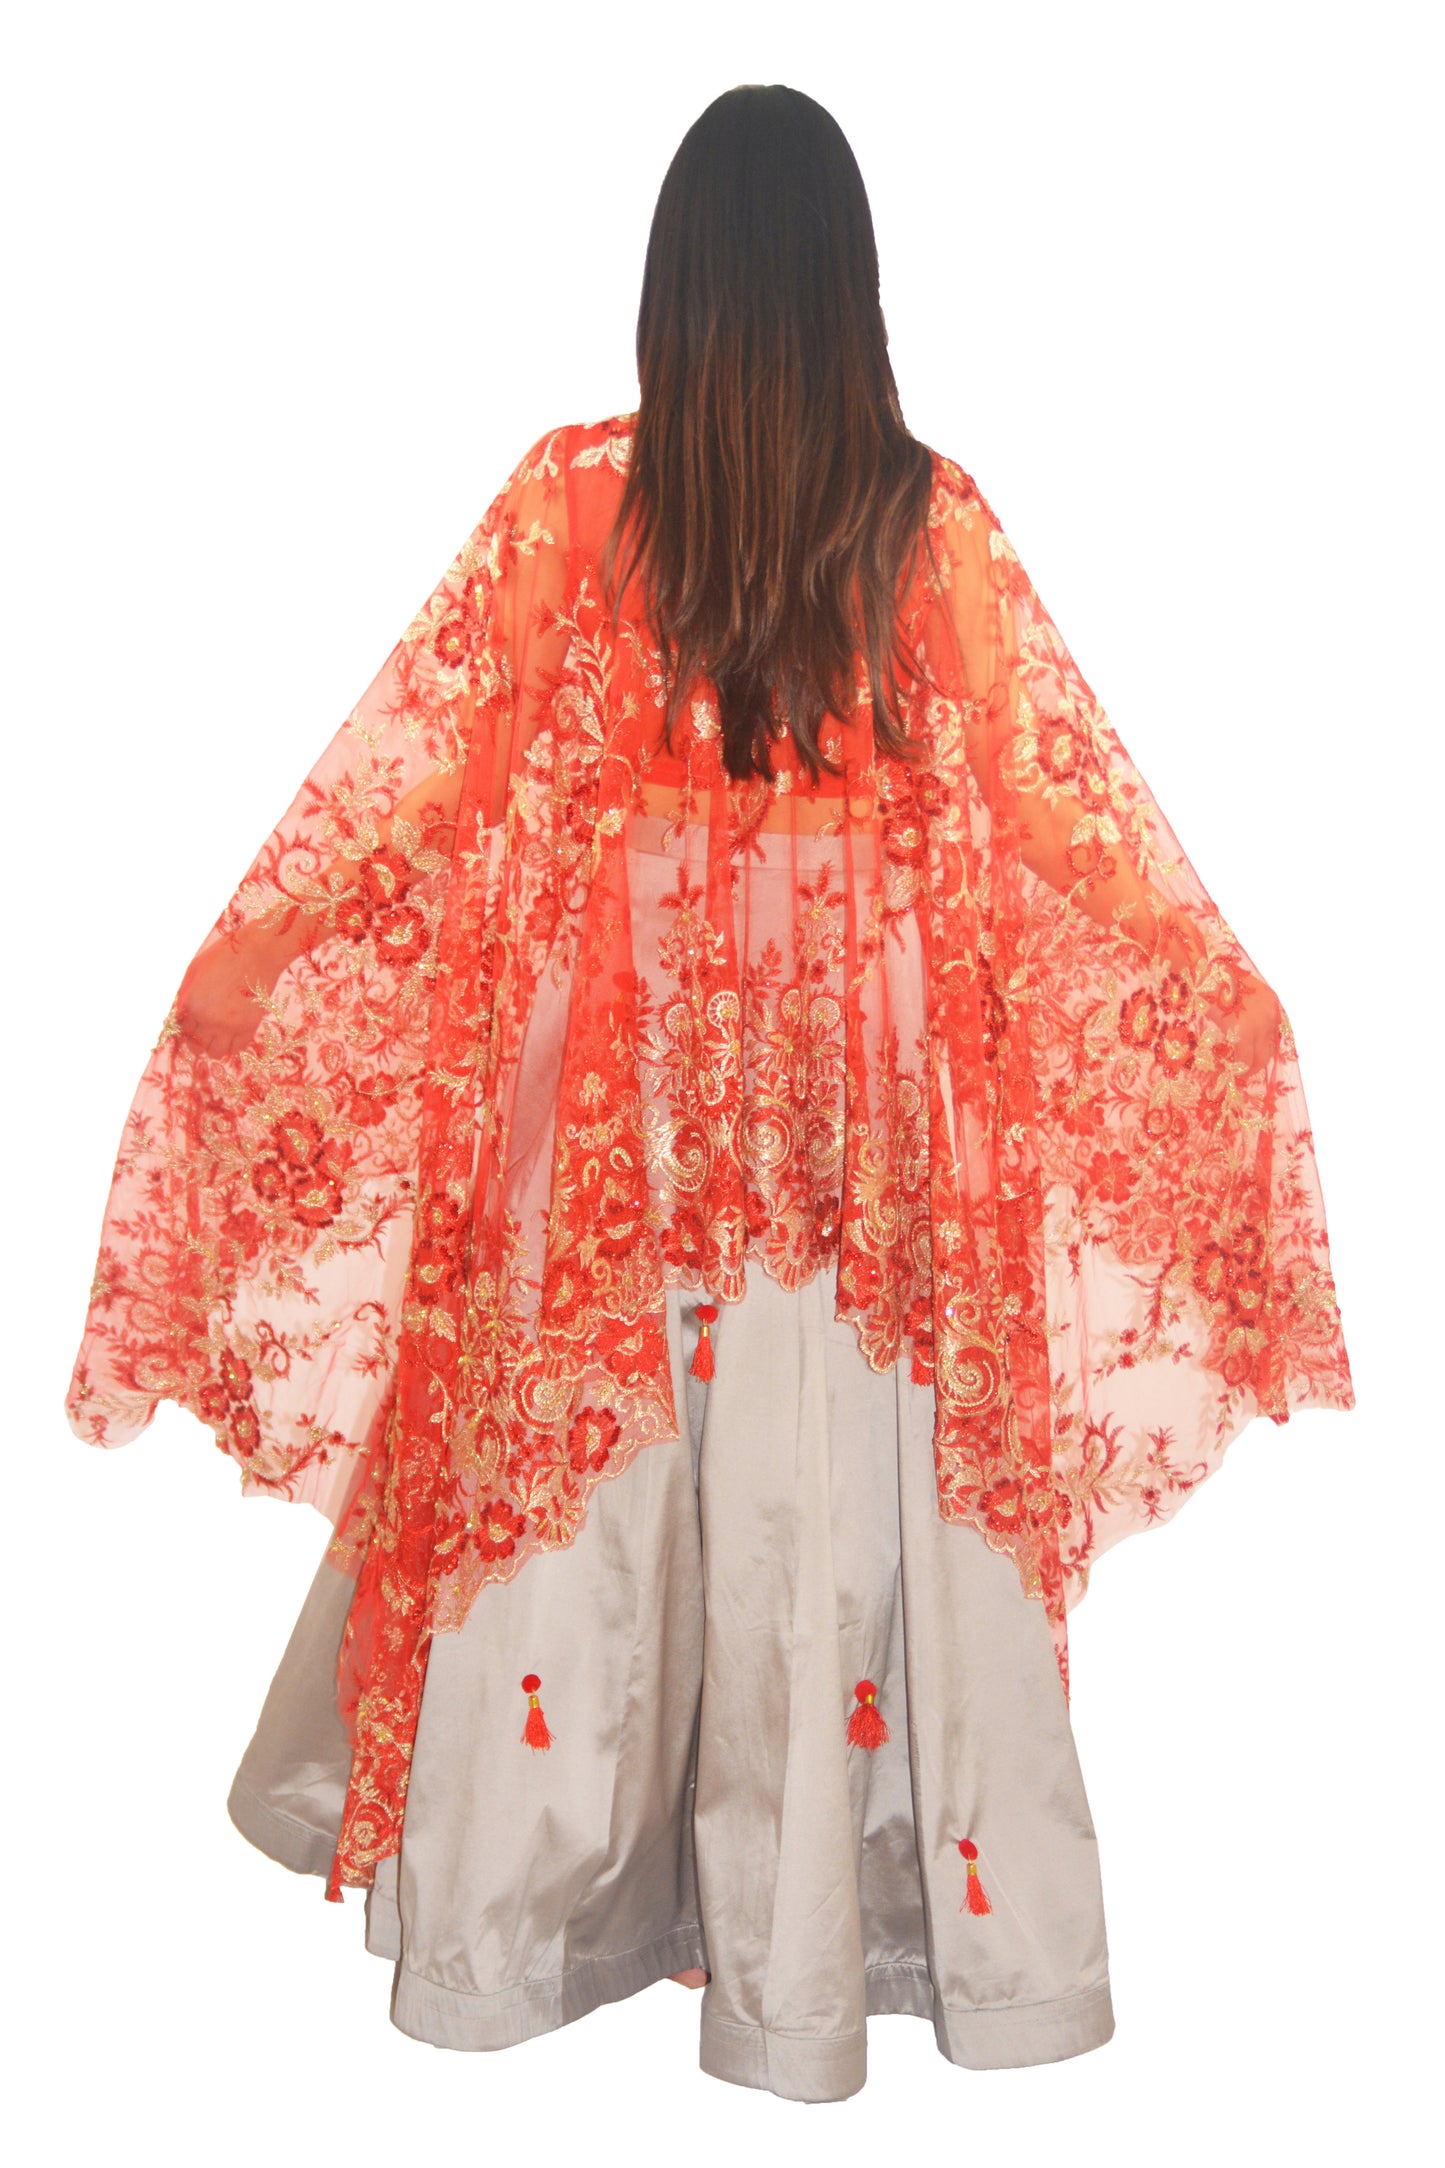 Load image into Gallery viewer, Juliette Cape Lengha - Red Cape Top w/Tassel Skirt - bAnuDesigns
